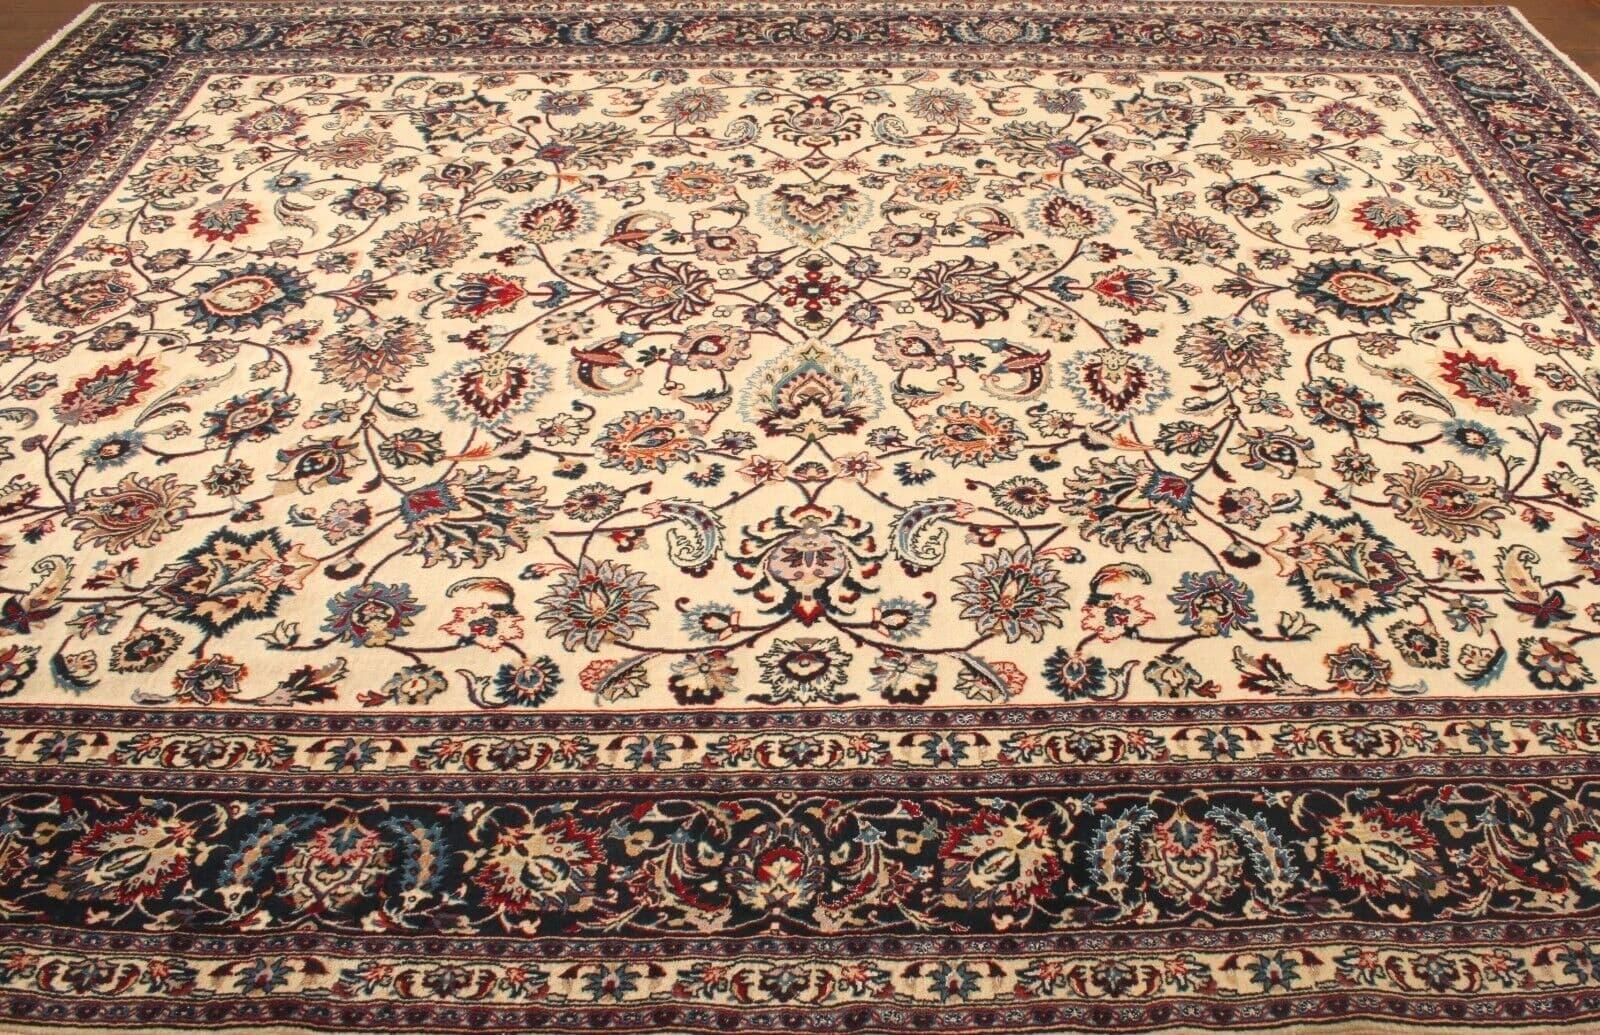 Handmade Contemporary Persian Style Tabriz Rug 10' x 12.7', 2000s - 1T04 For Sale 5